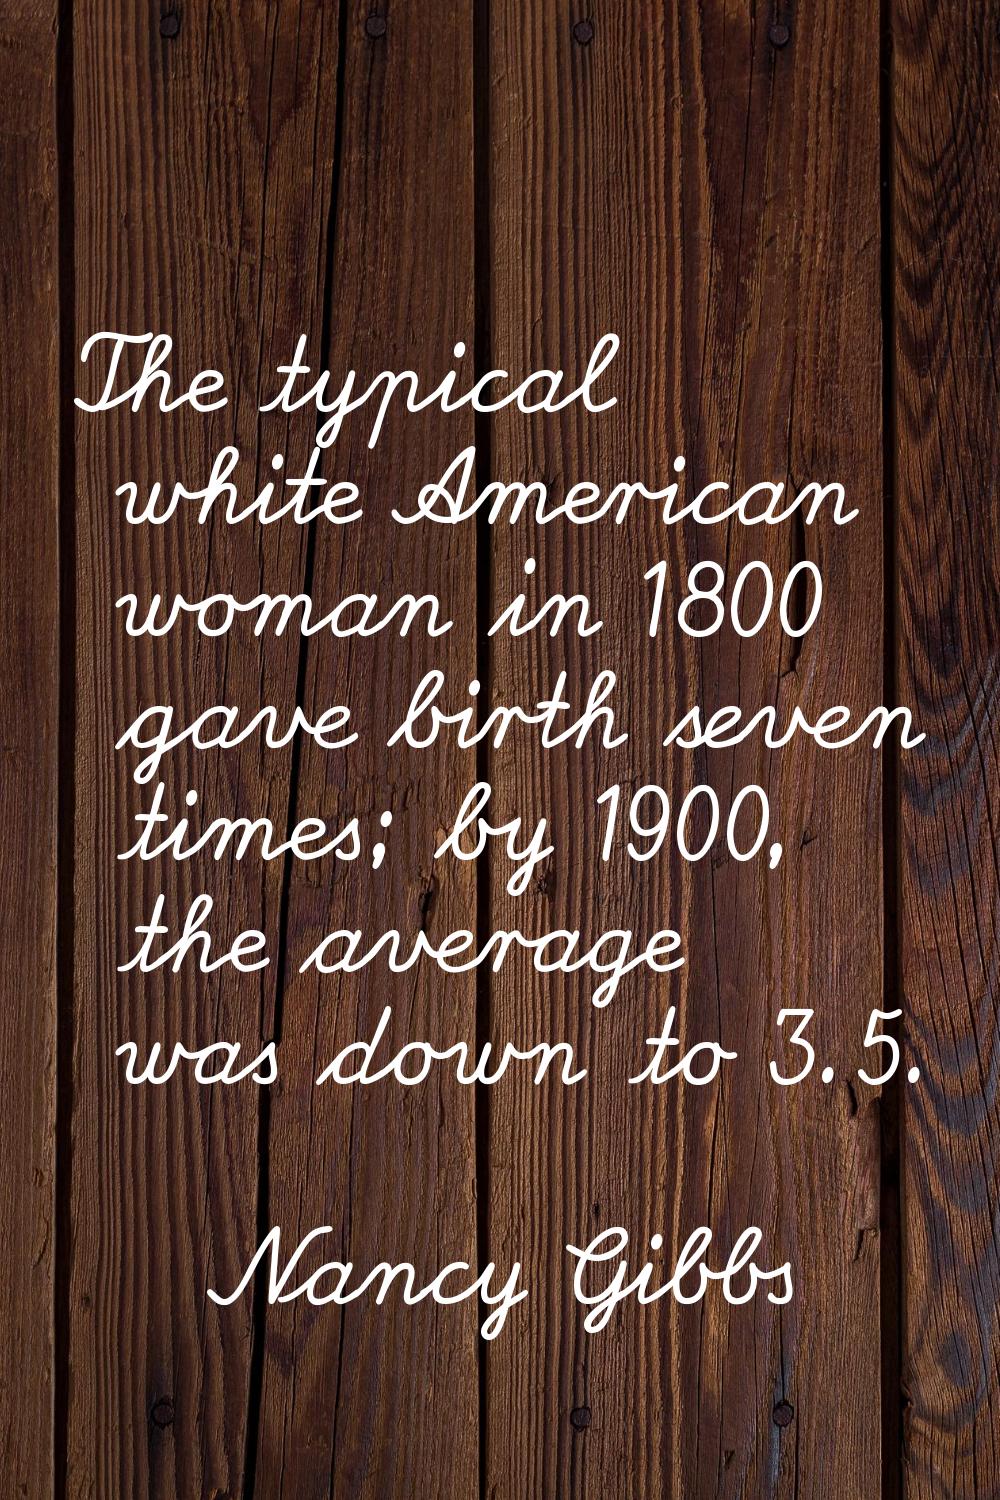 The typical white American woman in 1800 gave birth seven times; by 1900, the average was down to 3